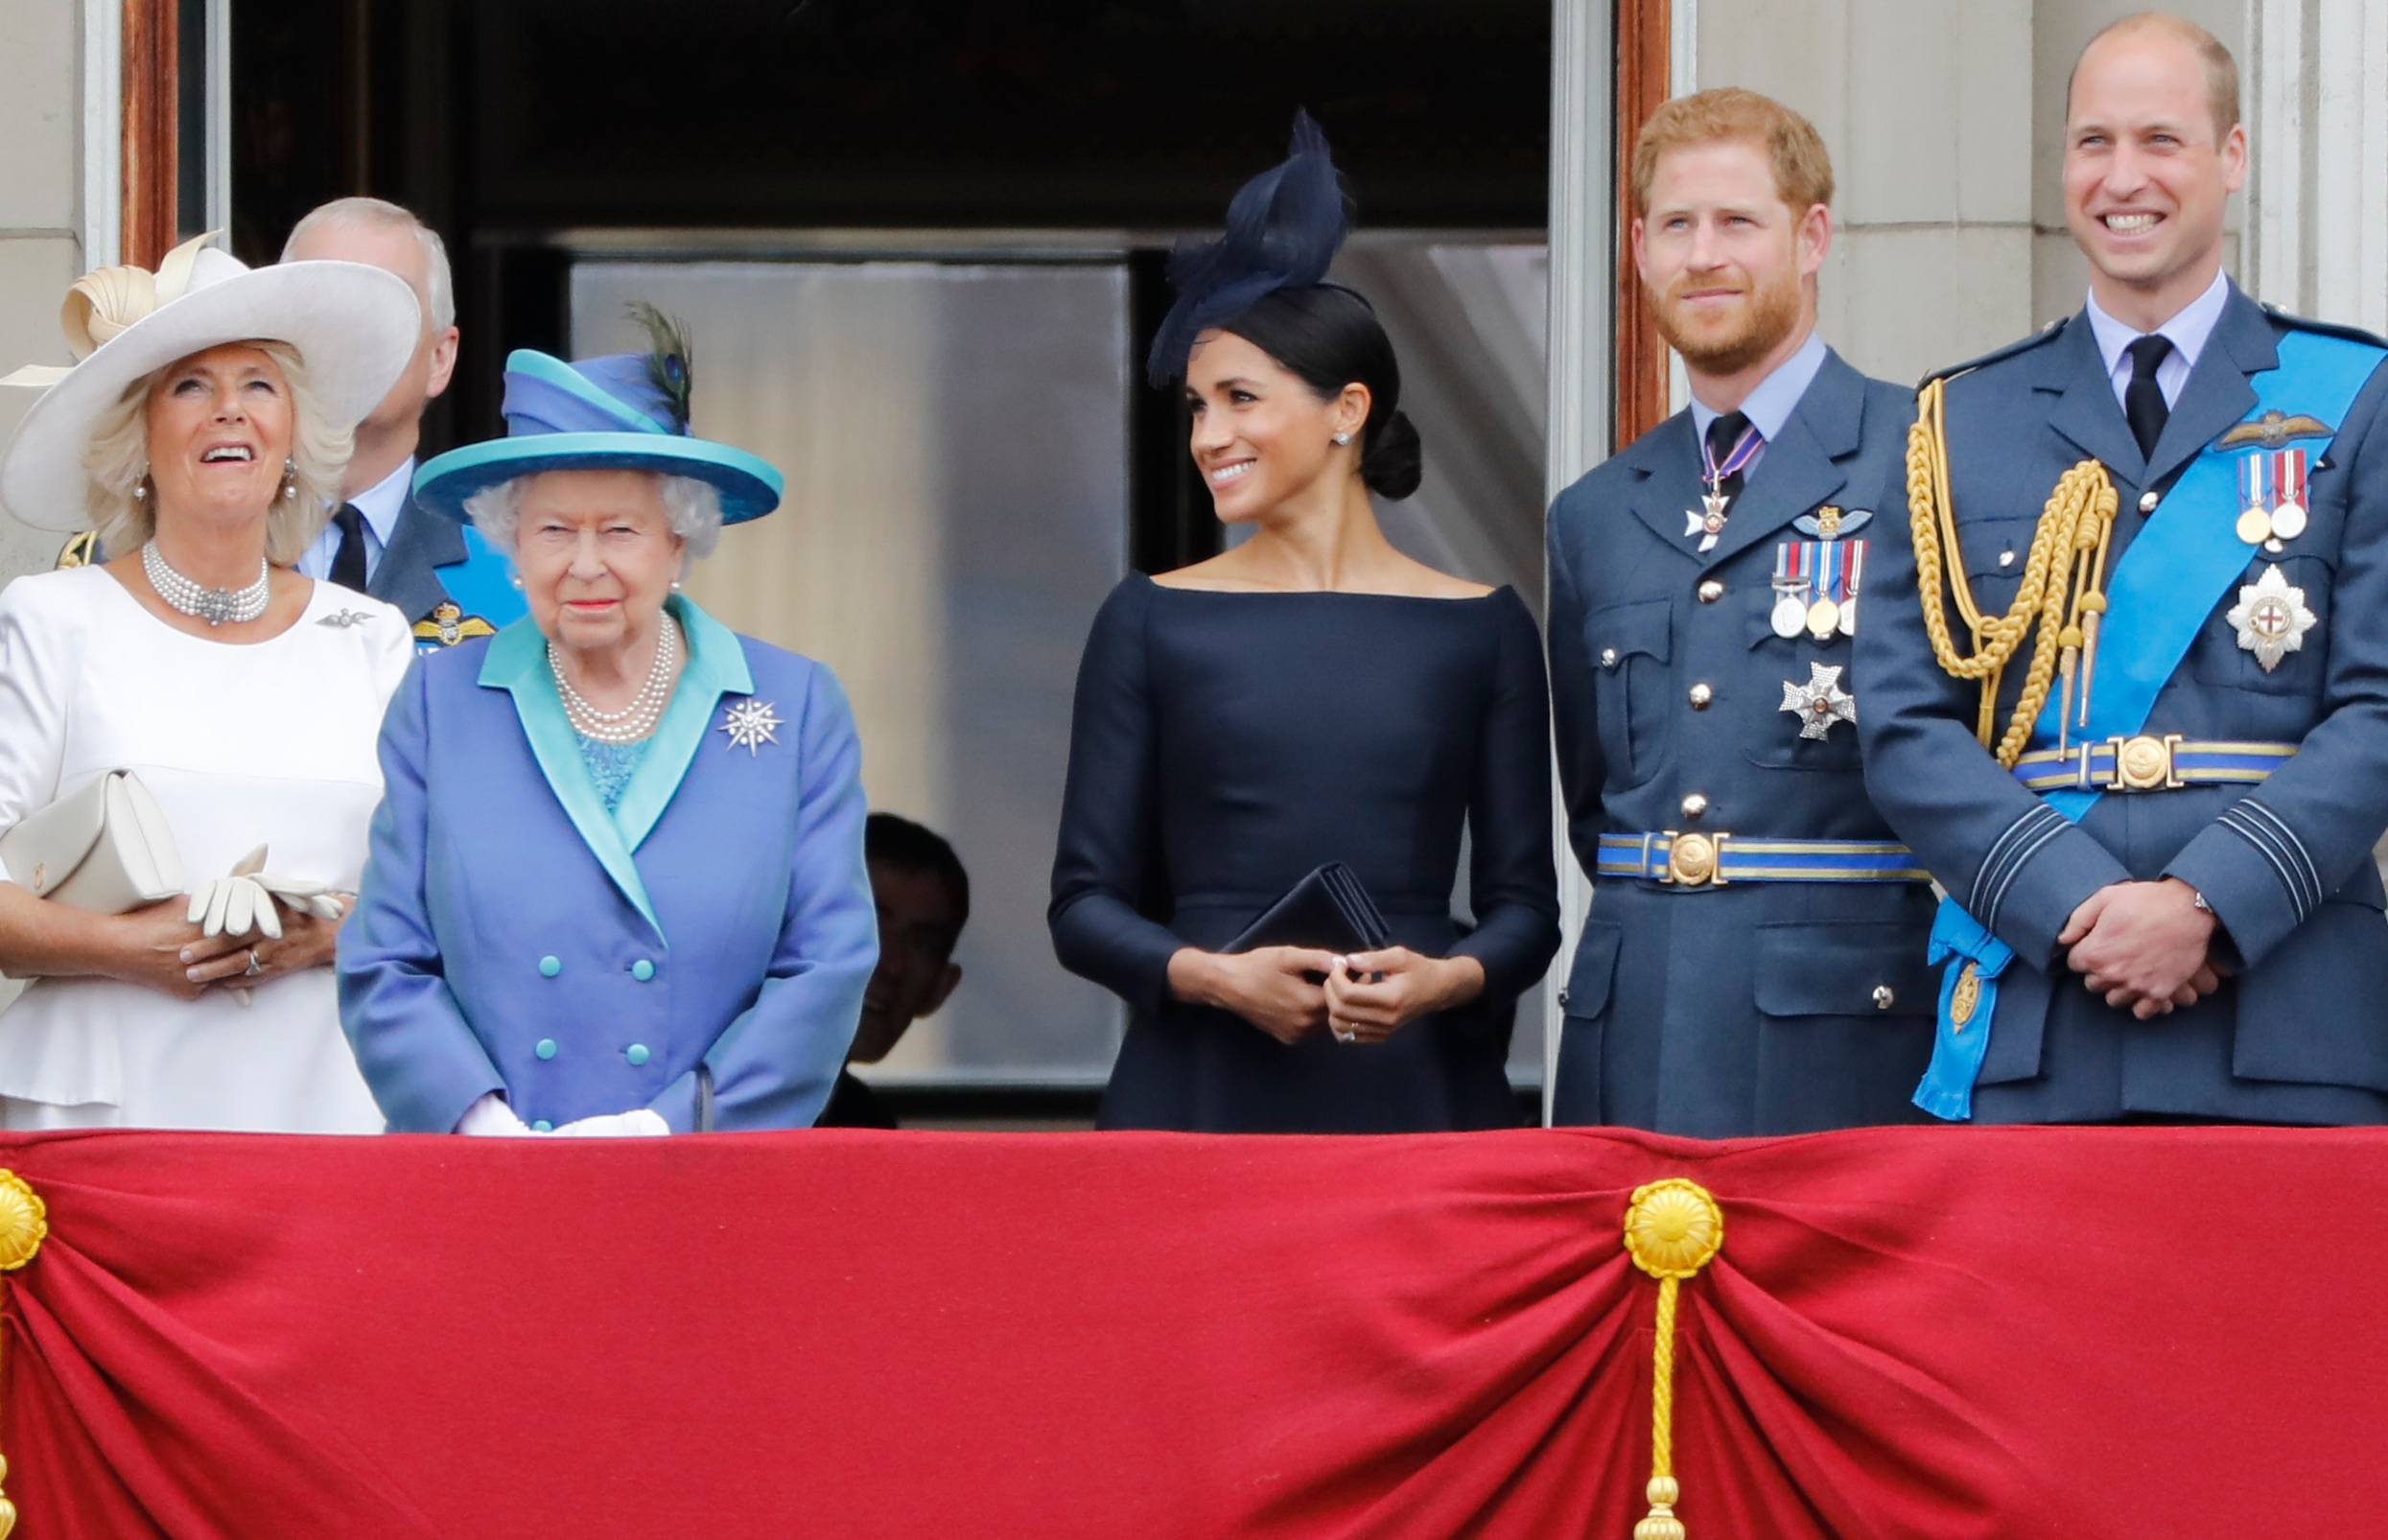 (L-R) Britain's Prince Charles, Prince of Wales, Britain's Camilla, Duchess of Cornwall, Britain's Queen Elizabeth II, Britain's Meghan, Duchess of Sussex, Britain's Prince Harry, Duke of Sussex, Britain's Prince William, Duke of Cambridge and Britain's Catherine, Duchess of Cambridge stand on the balcony of Buckingham Palace on July 10, 2018 to watch a military fly-past to mark the centenary of the Royal Air Force (RAF). - The Queen and members of the royal family took part a series of engagements on July 10 to mark the centenary of the Royal Air Force. (Photo by Tolga AKMEN / AFP)